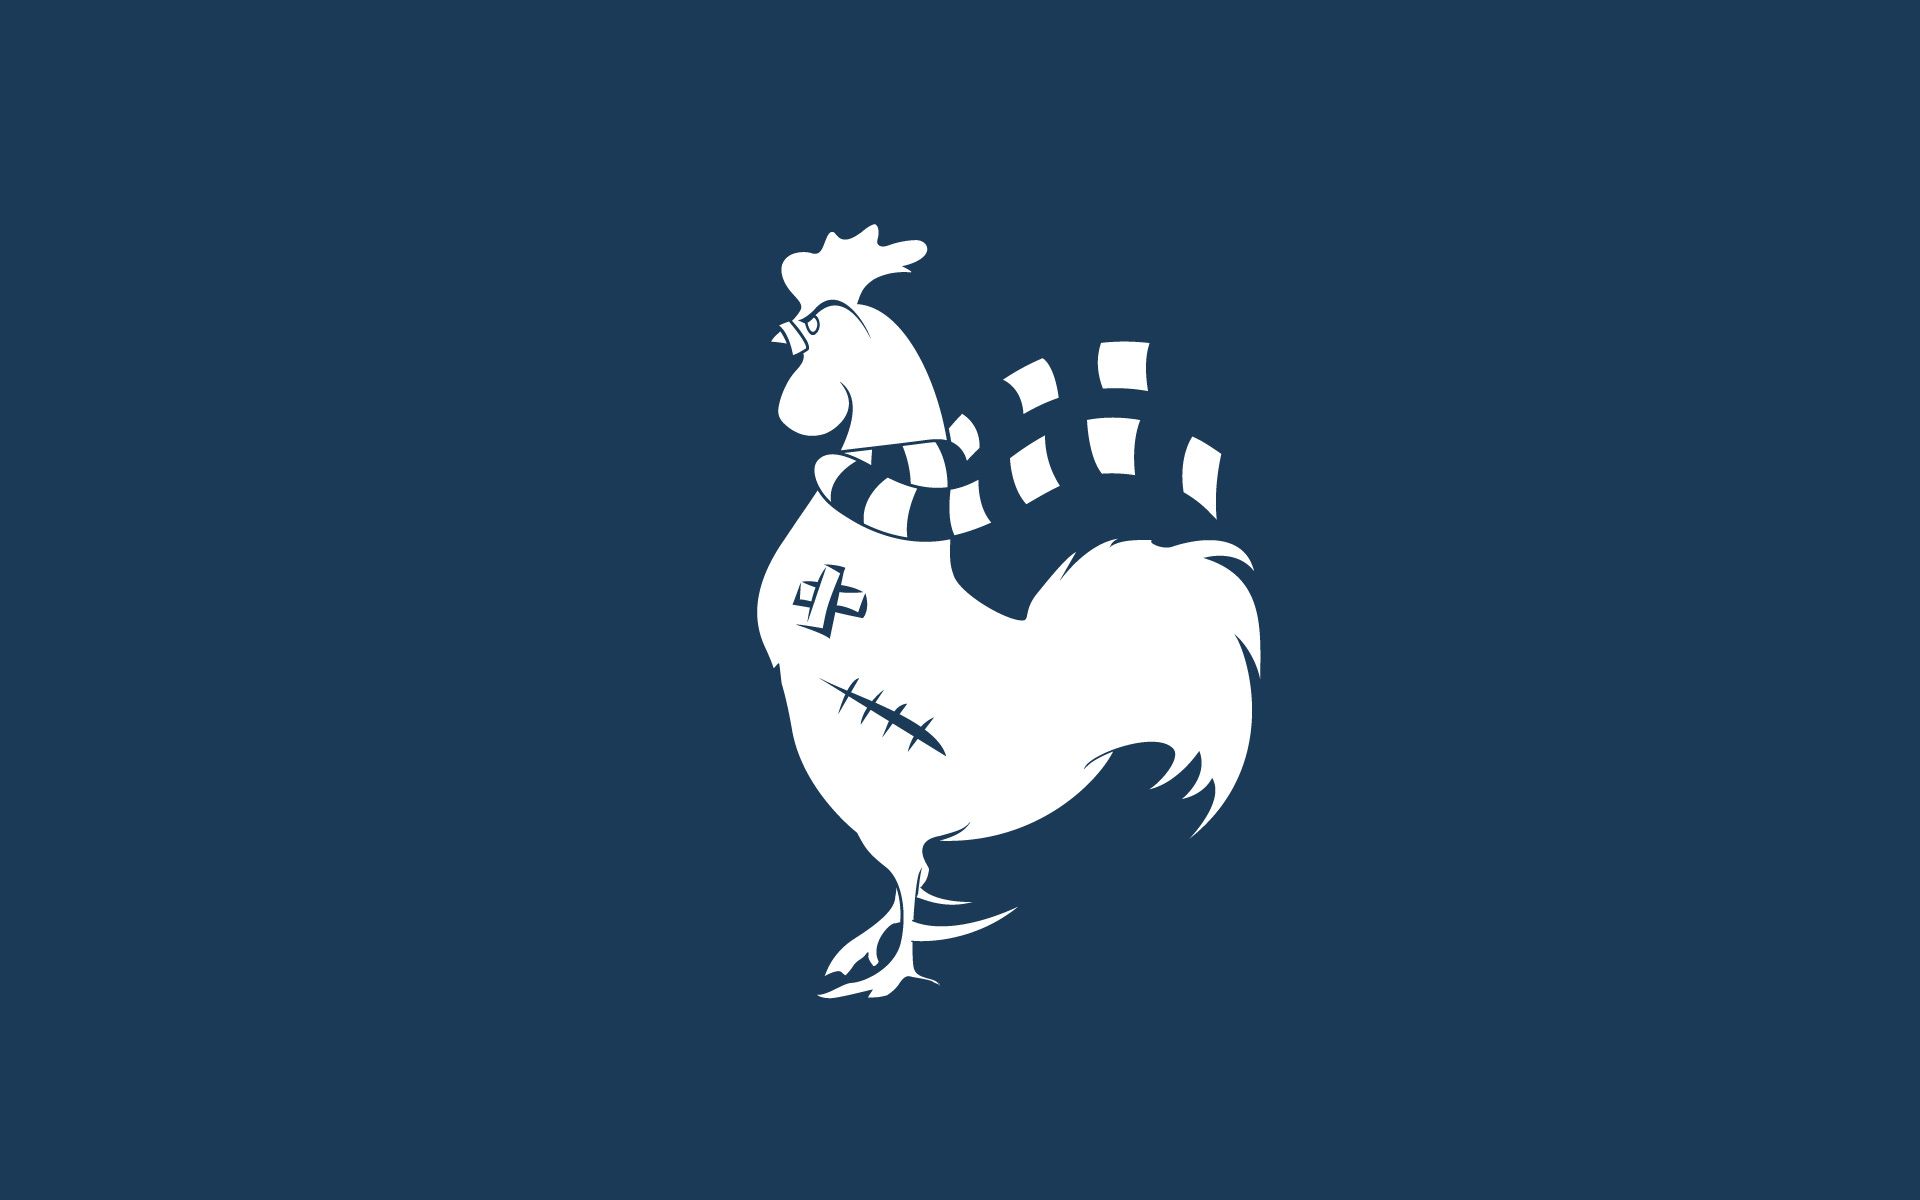 Backgrounds & Wallpapers | The Fighting Cock - Tottenham Hotspur ...